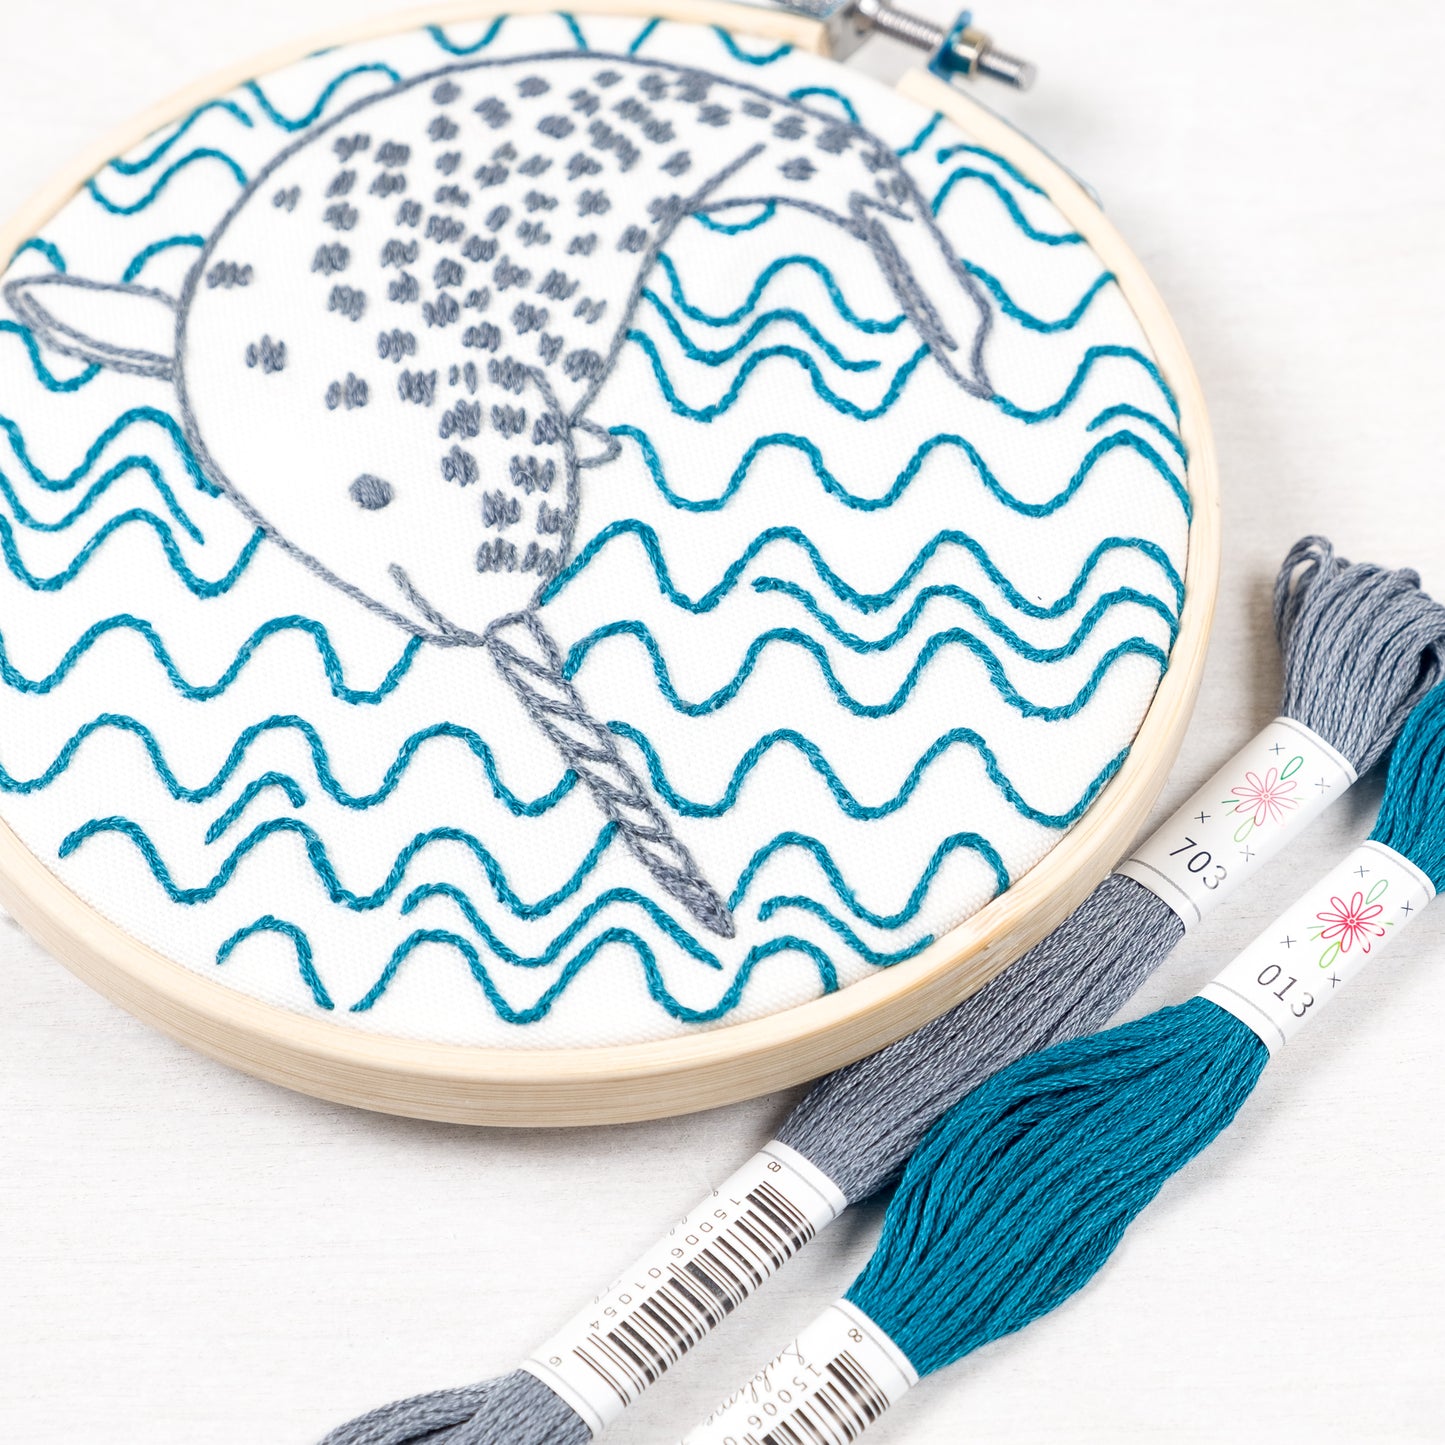 Narly Narwhal Embroidery Kit